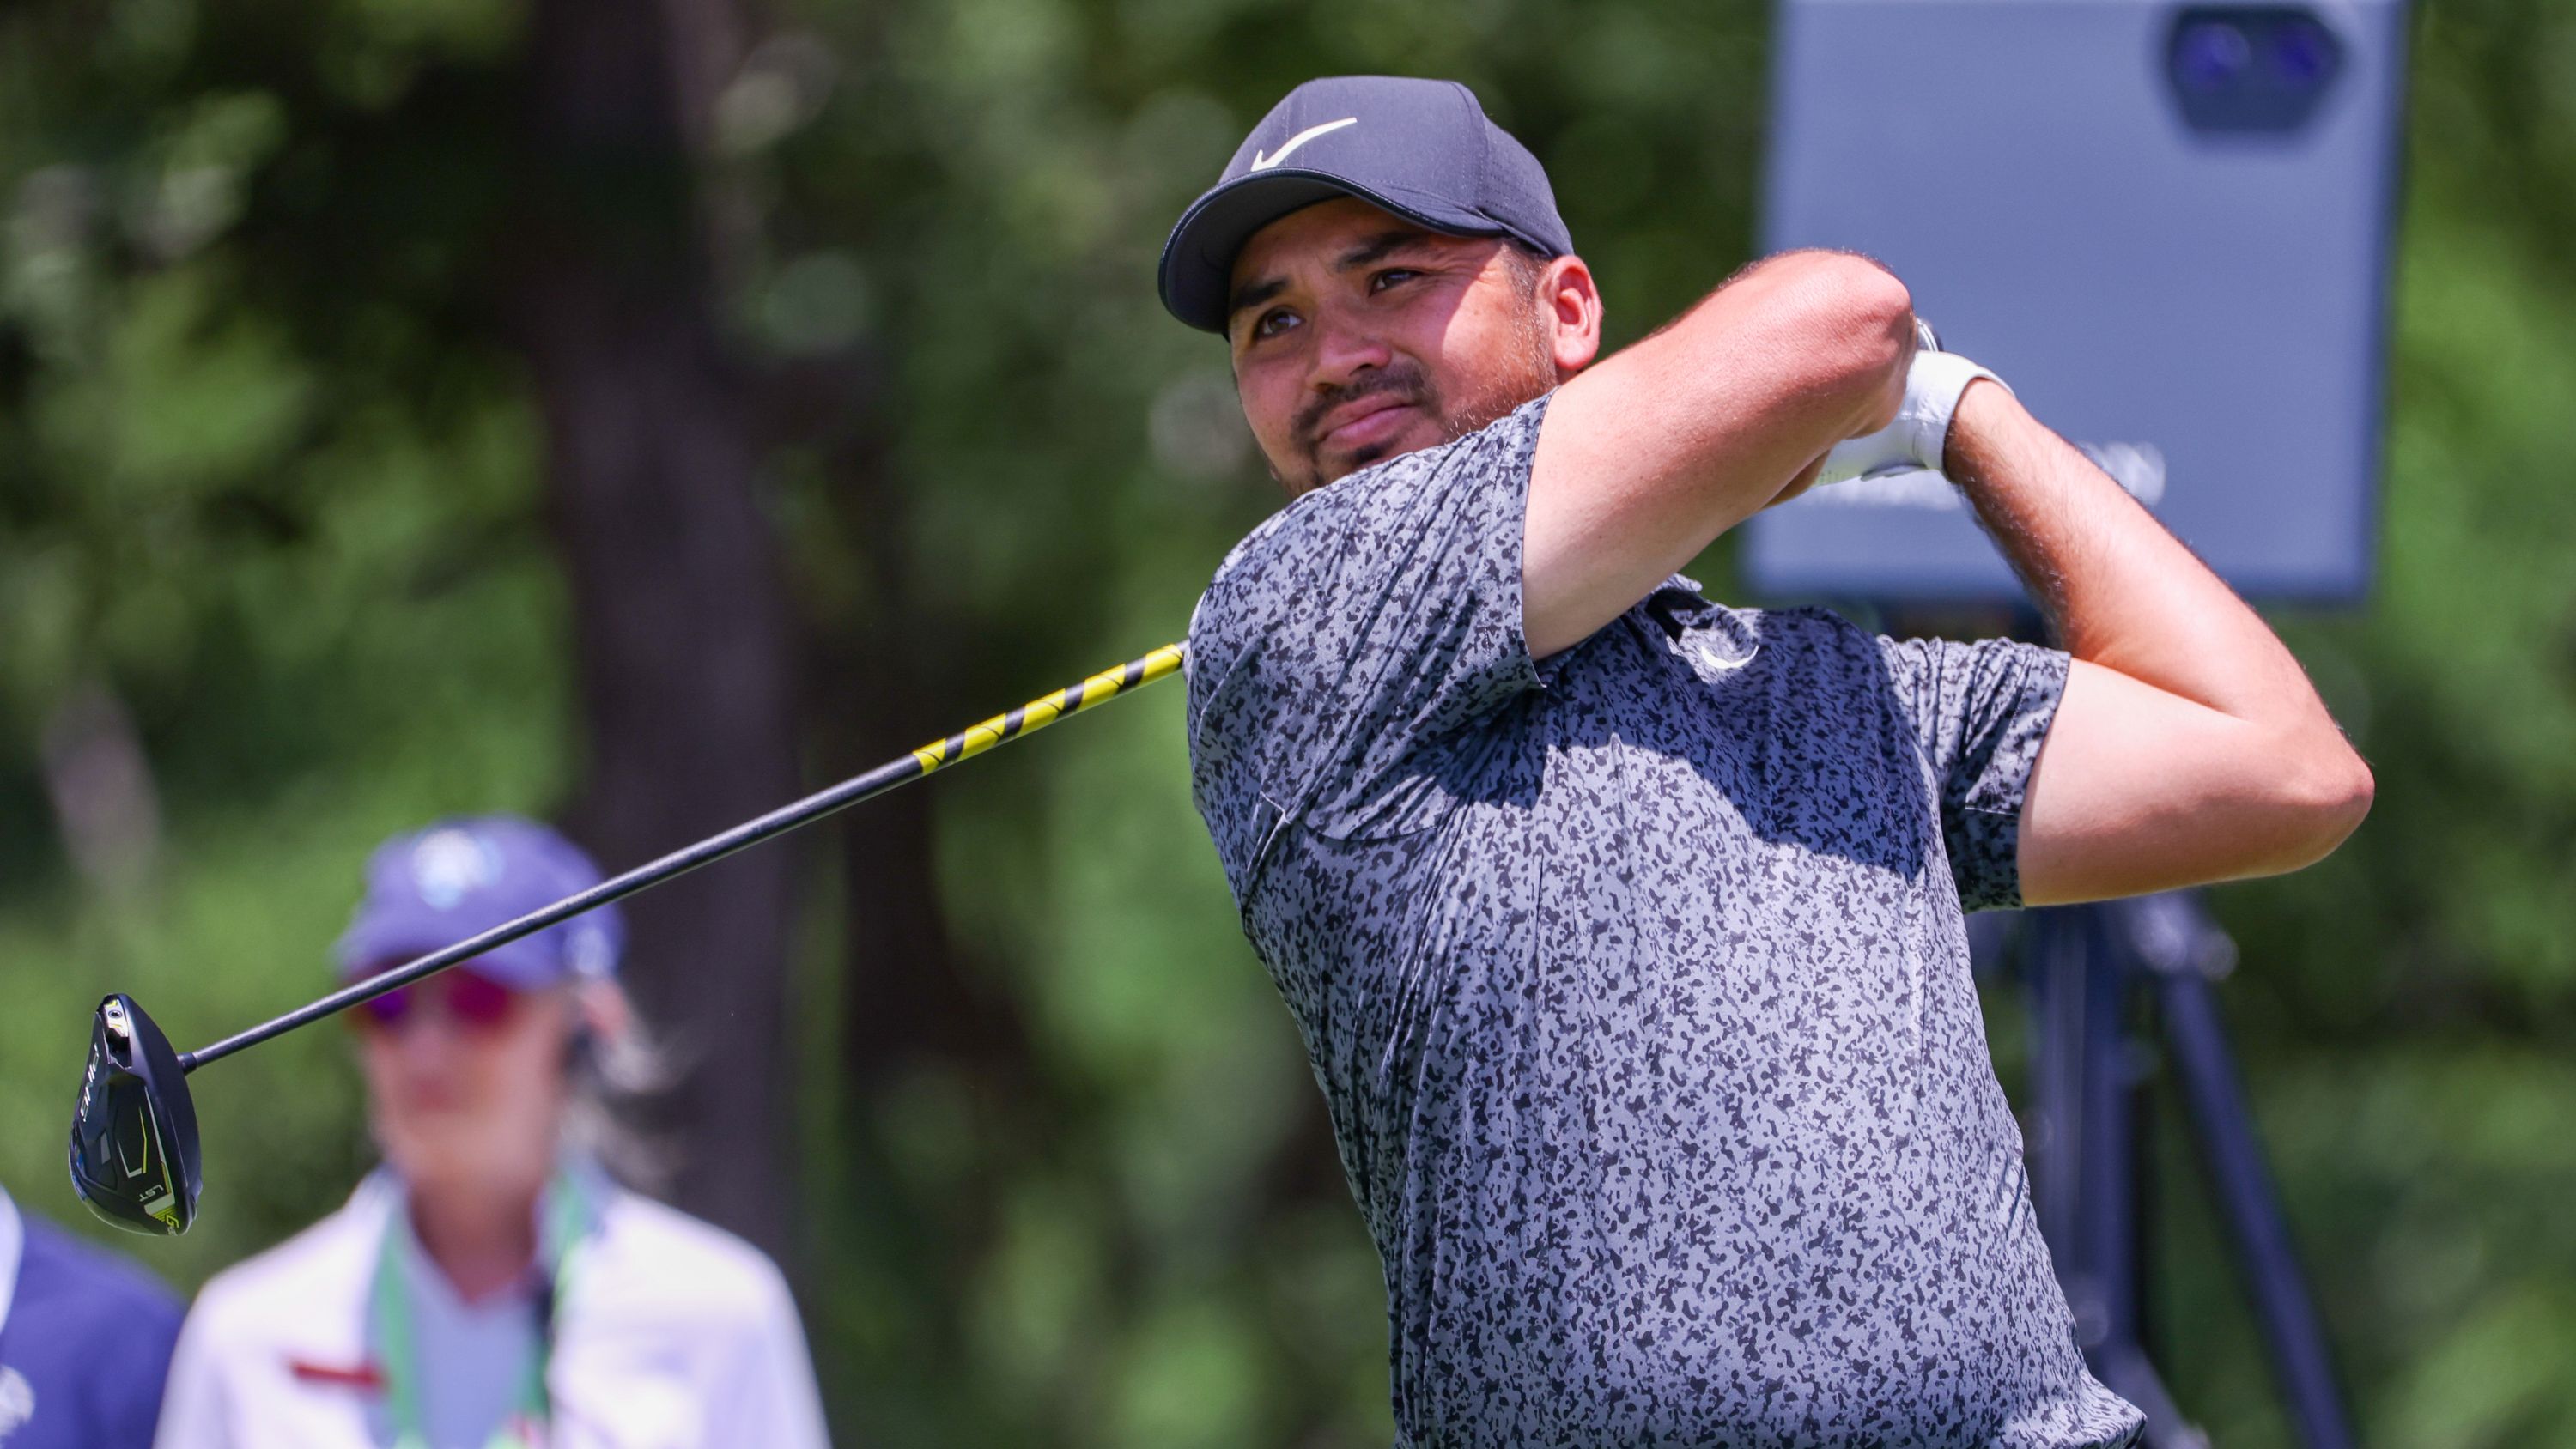 'Boring birdies' put Jason Day in contention for drought-breaking PGA Tour win